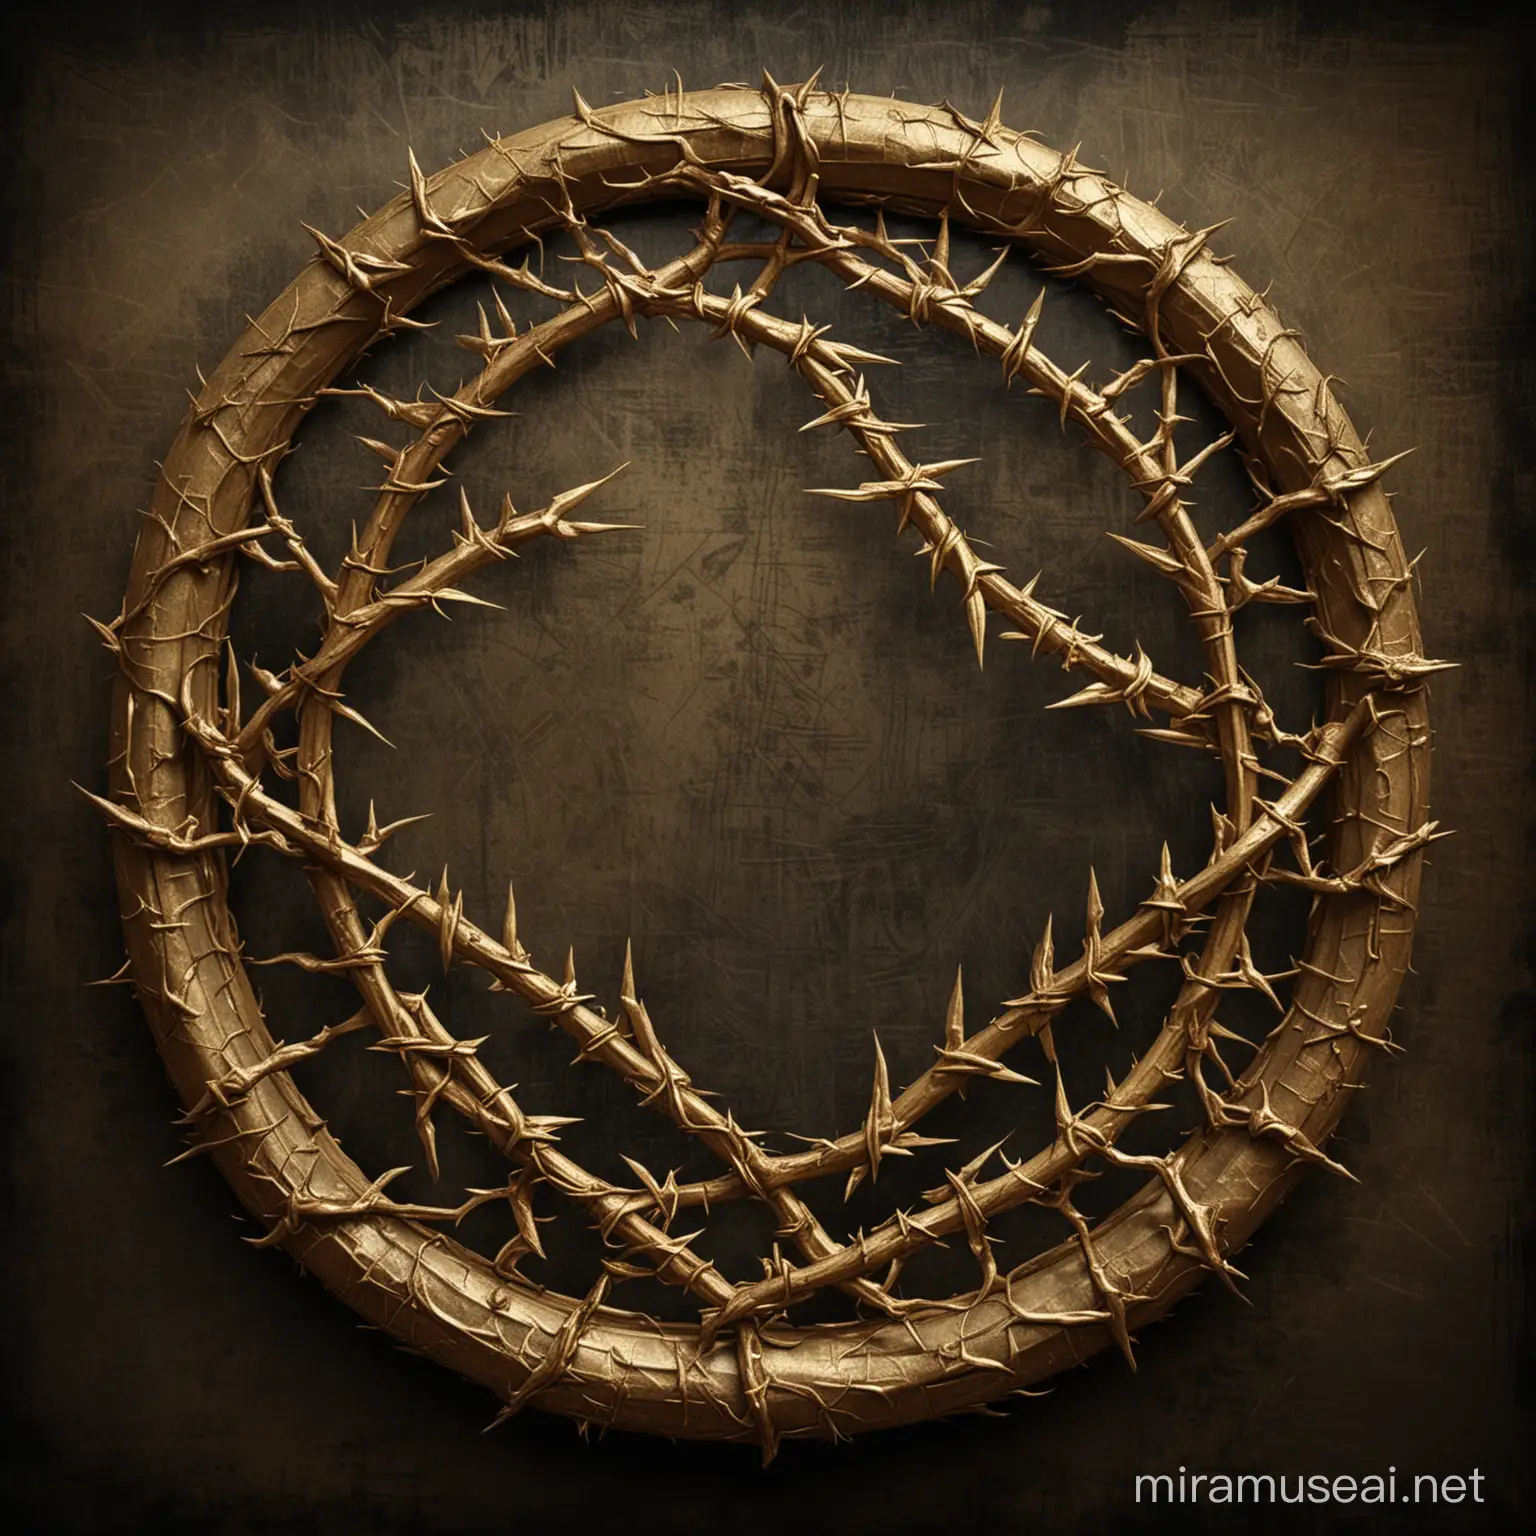 Golden Intertwined Thorns Crown on Ancient Scroll Background